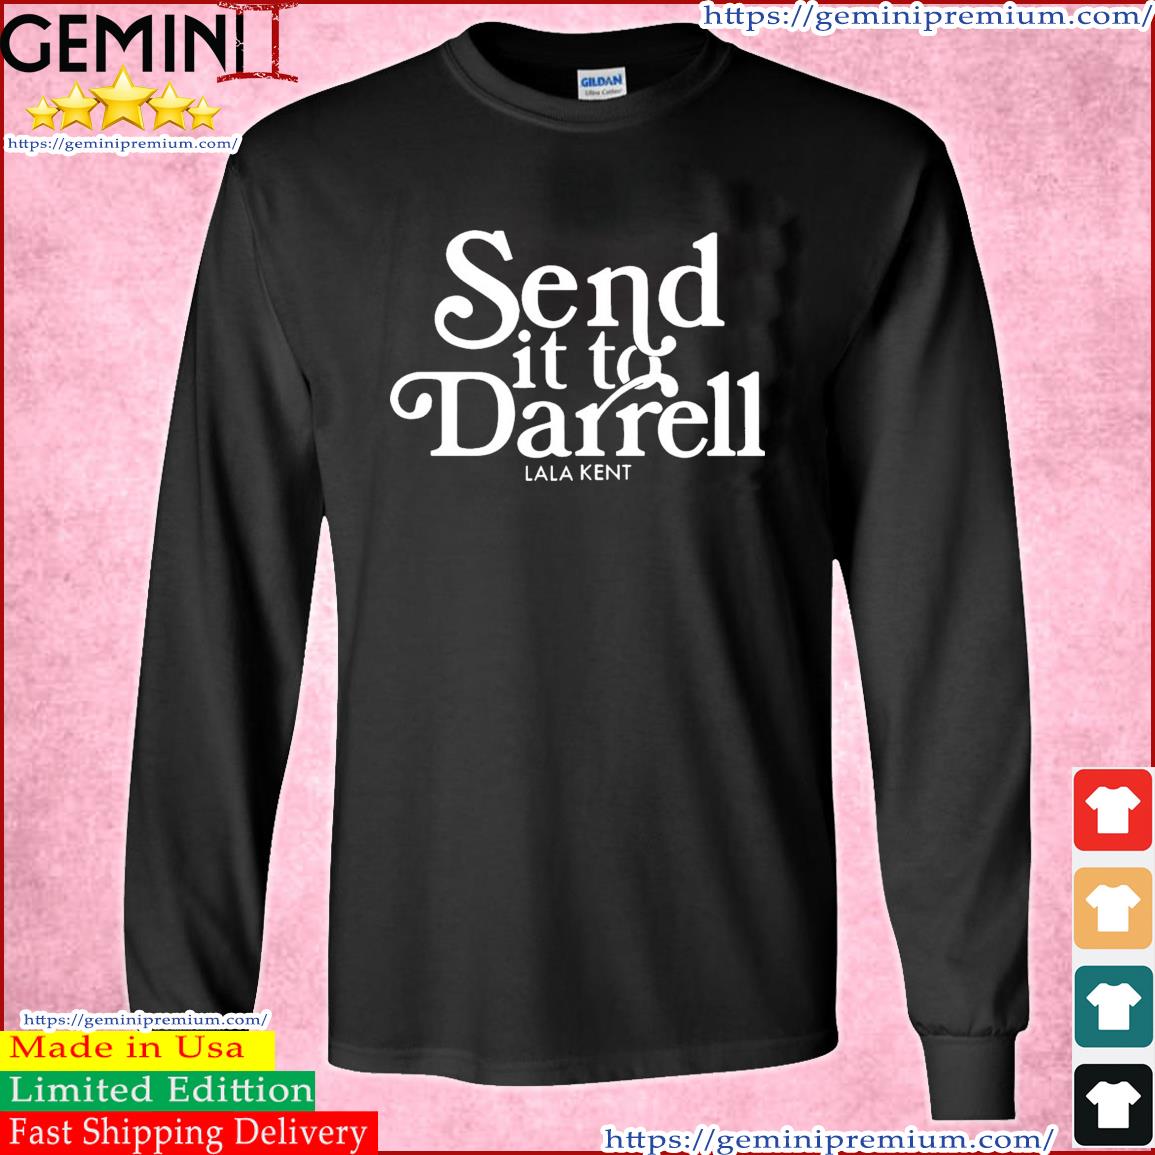 Official Lala Kent Send it to Darrell s Long Sleeve Tee